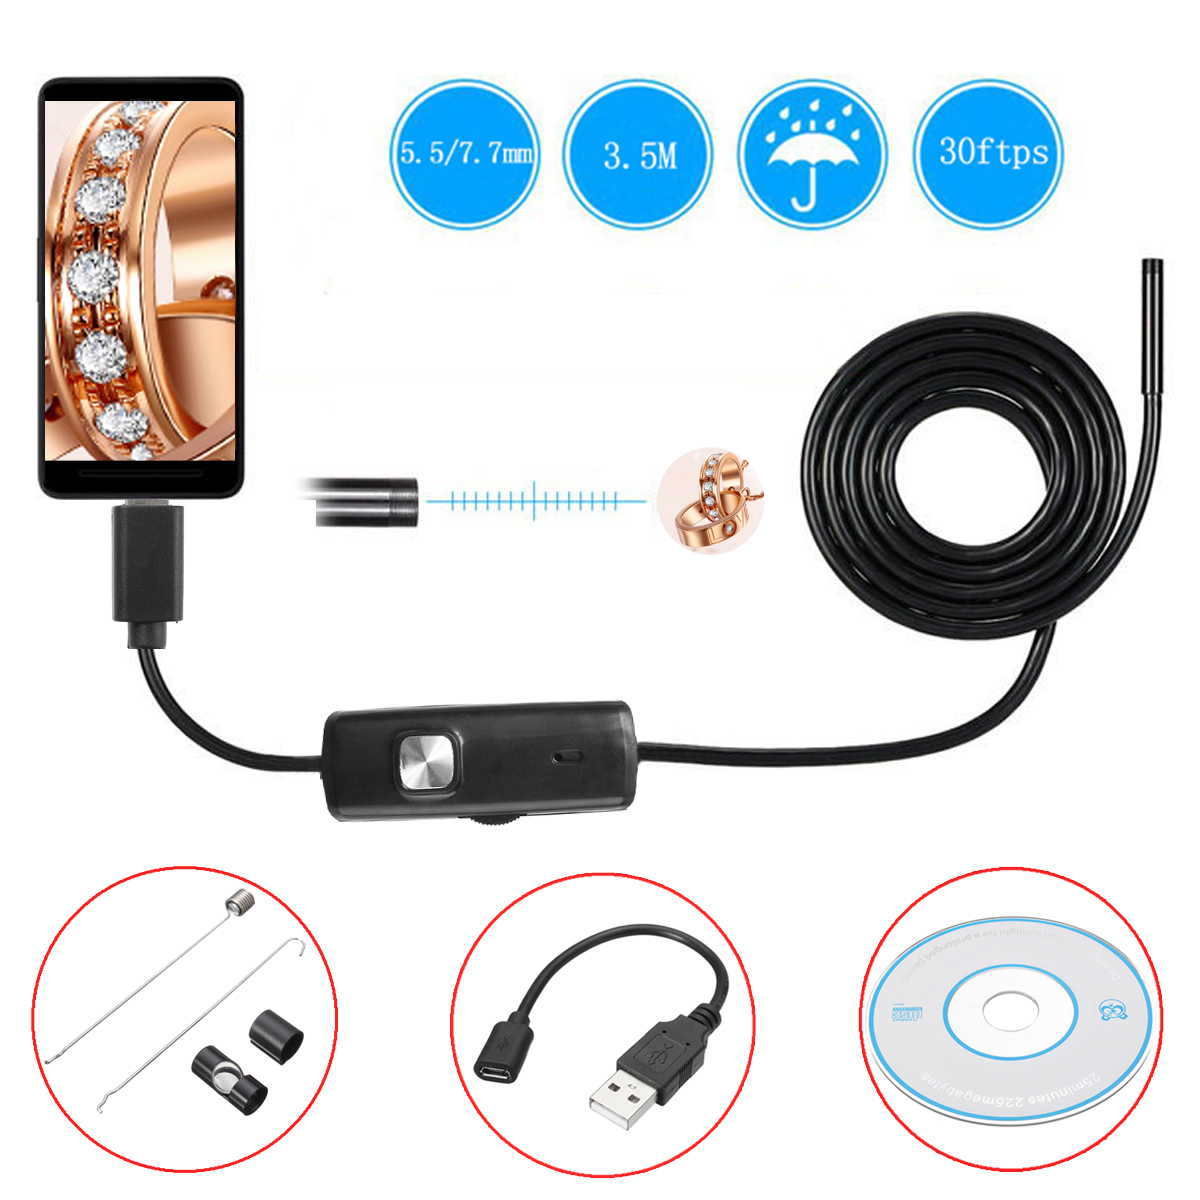 

5.5/7mm 6 LED Len 3.5m Micro USB OTG Endoscope Waterproof Inspection Camera Borescope For Android PC